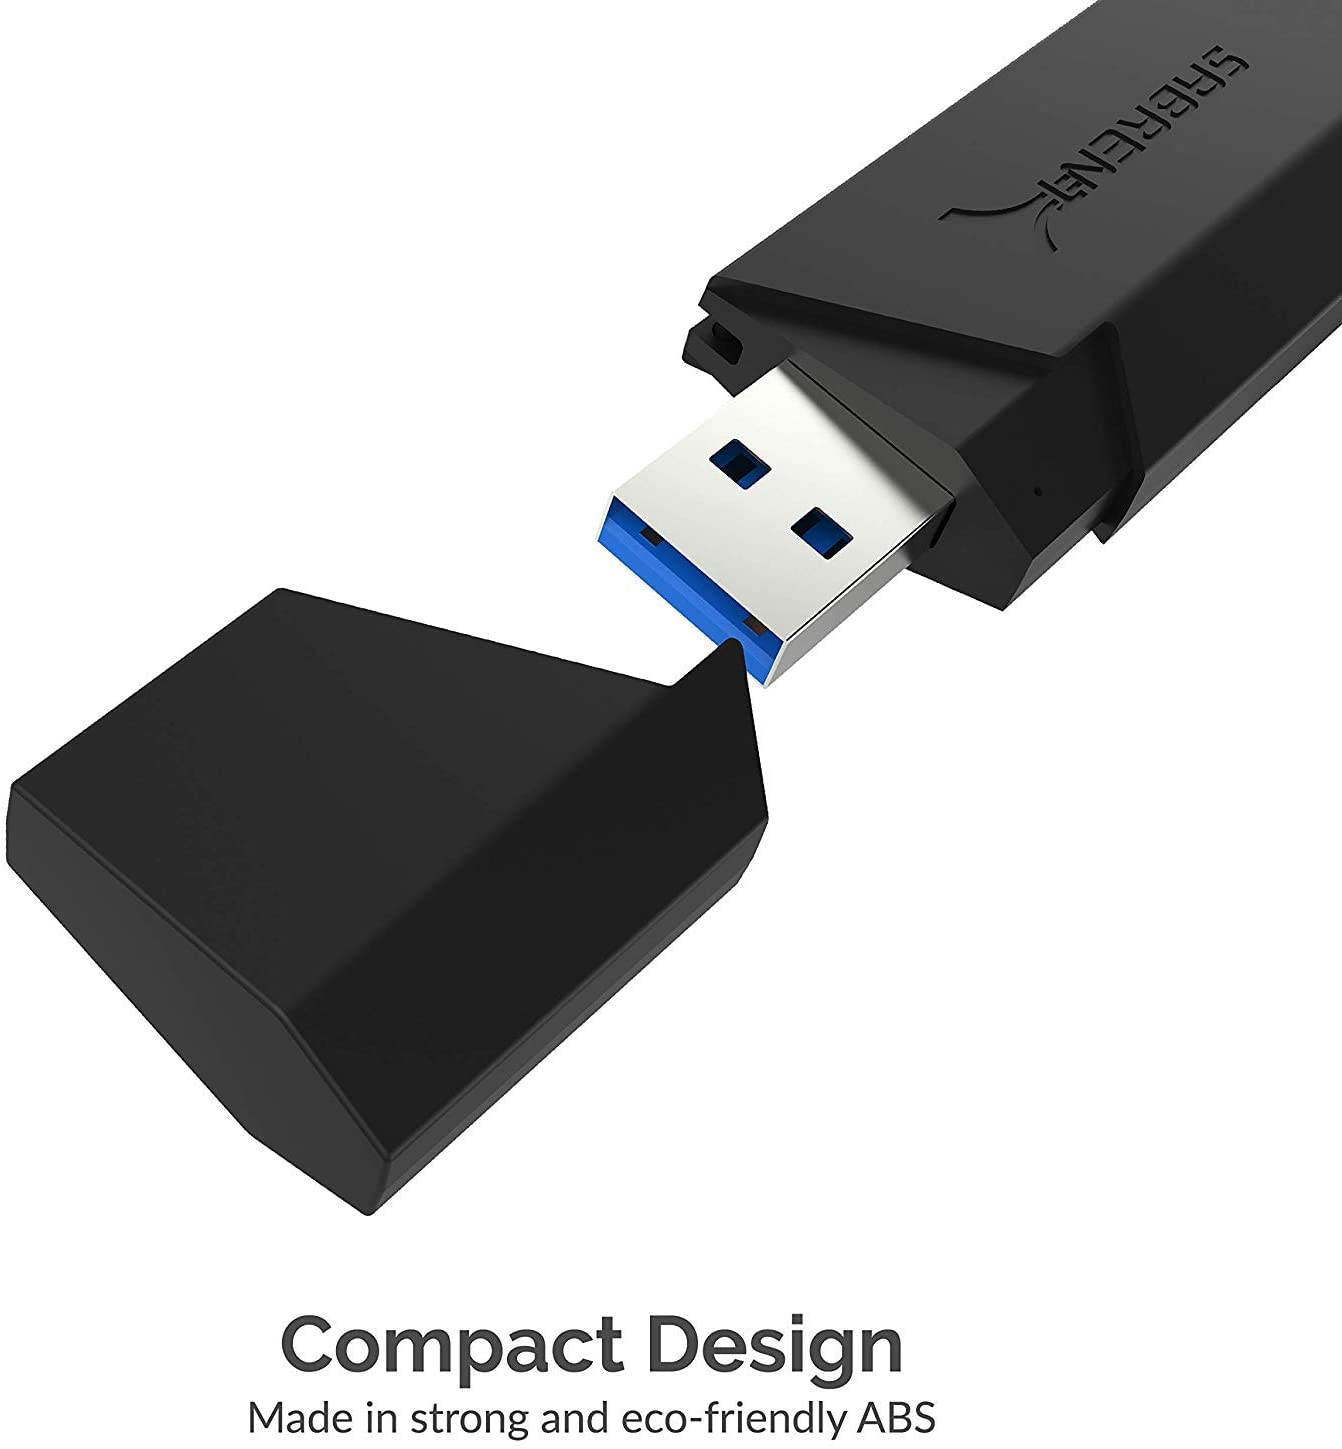 SABRENT SuperSpeed 2 Slot USB 3.0 Flash Memory Card Reader for Windows, Mac, Linux, and Certain Android Systems Supports SD, SDHC, SDXC, MMC/MicroSD, T Flash [Black] (CR-UMSS)